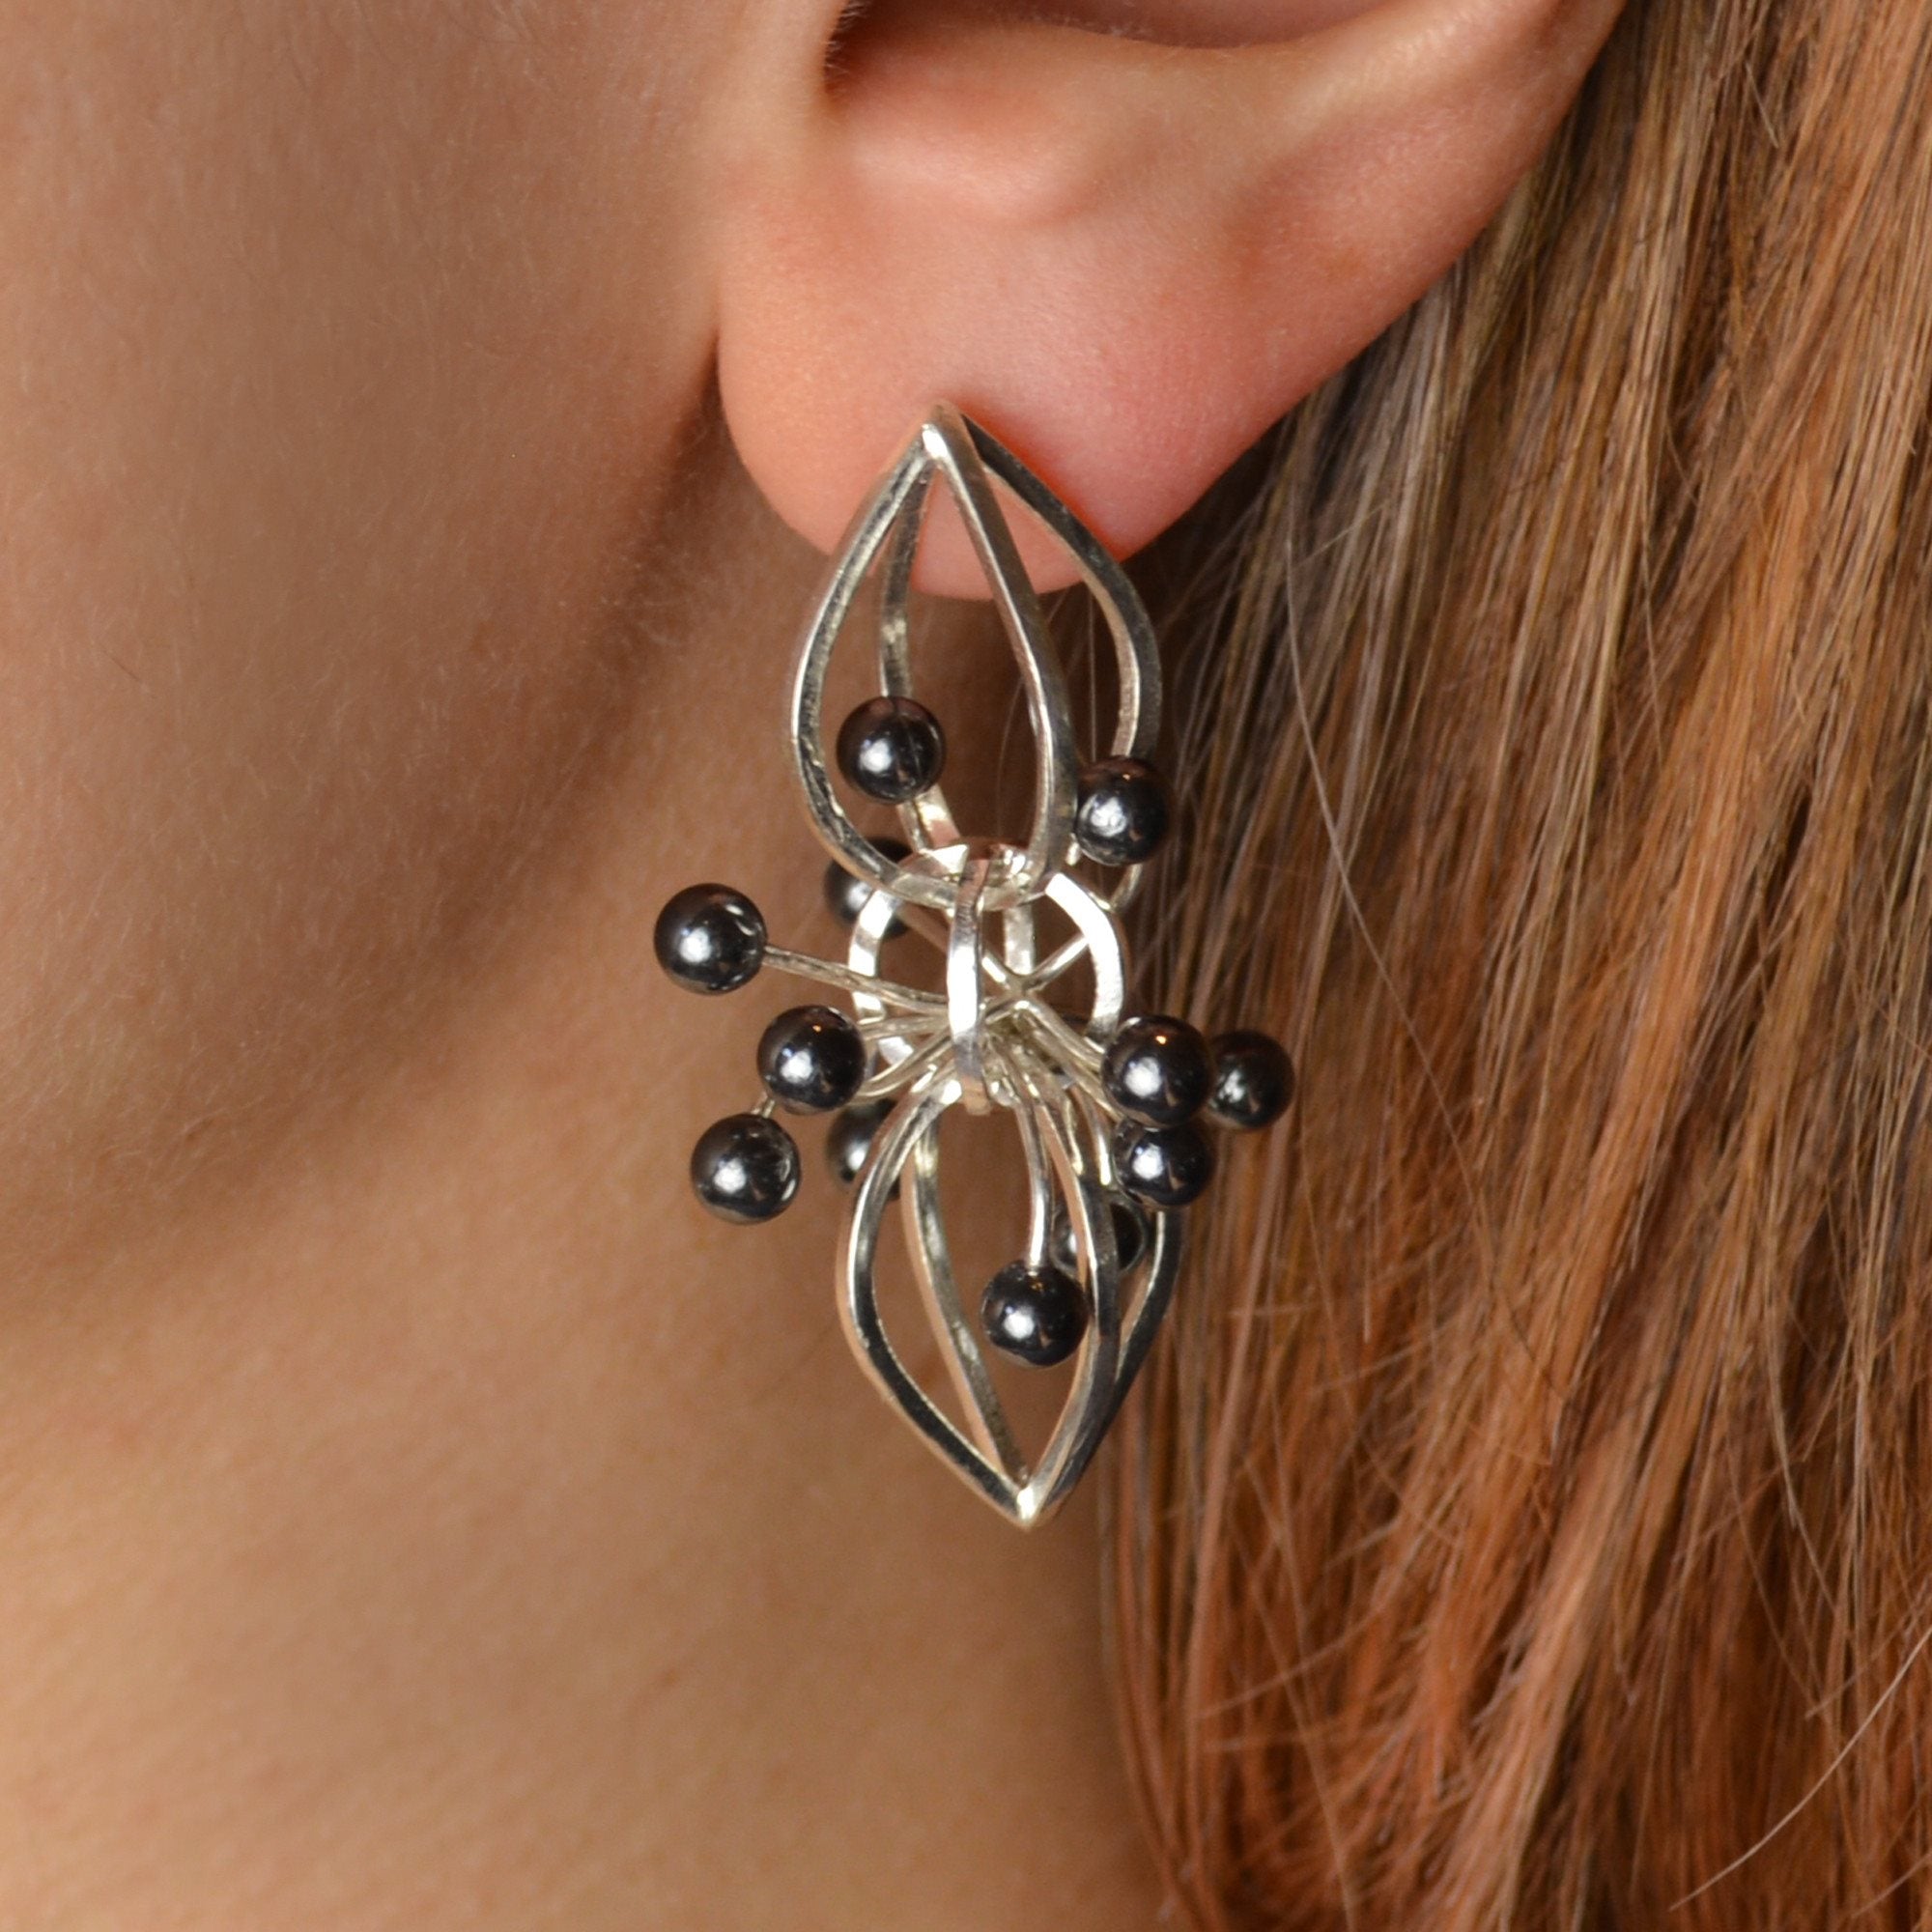 White Comet Earrings in Sterling Silver and Hematite